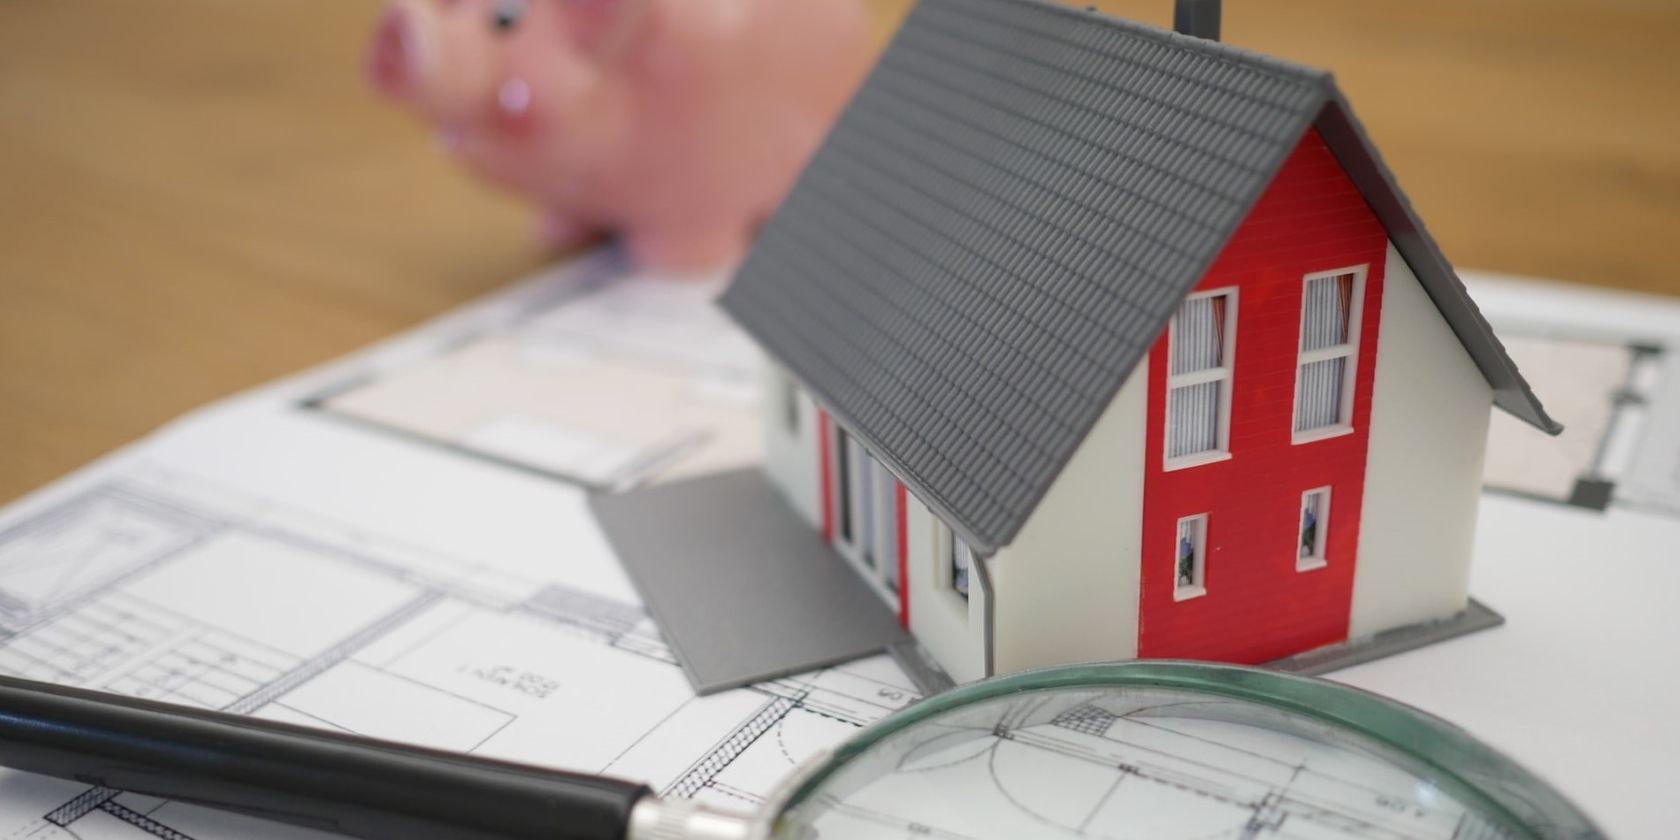 house model with magnifying glass and piggy bank